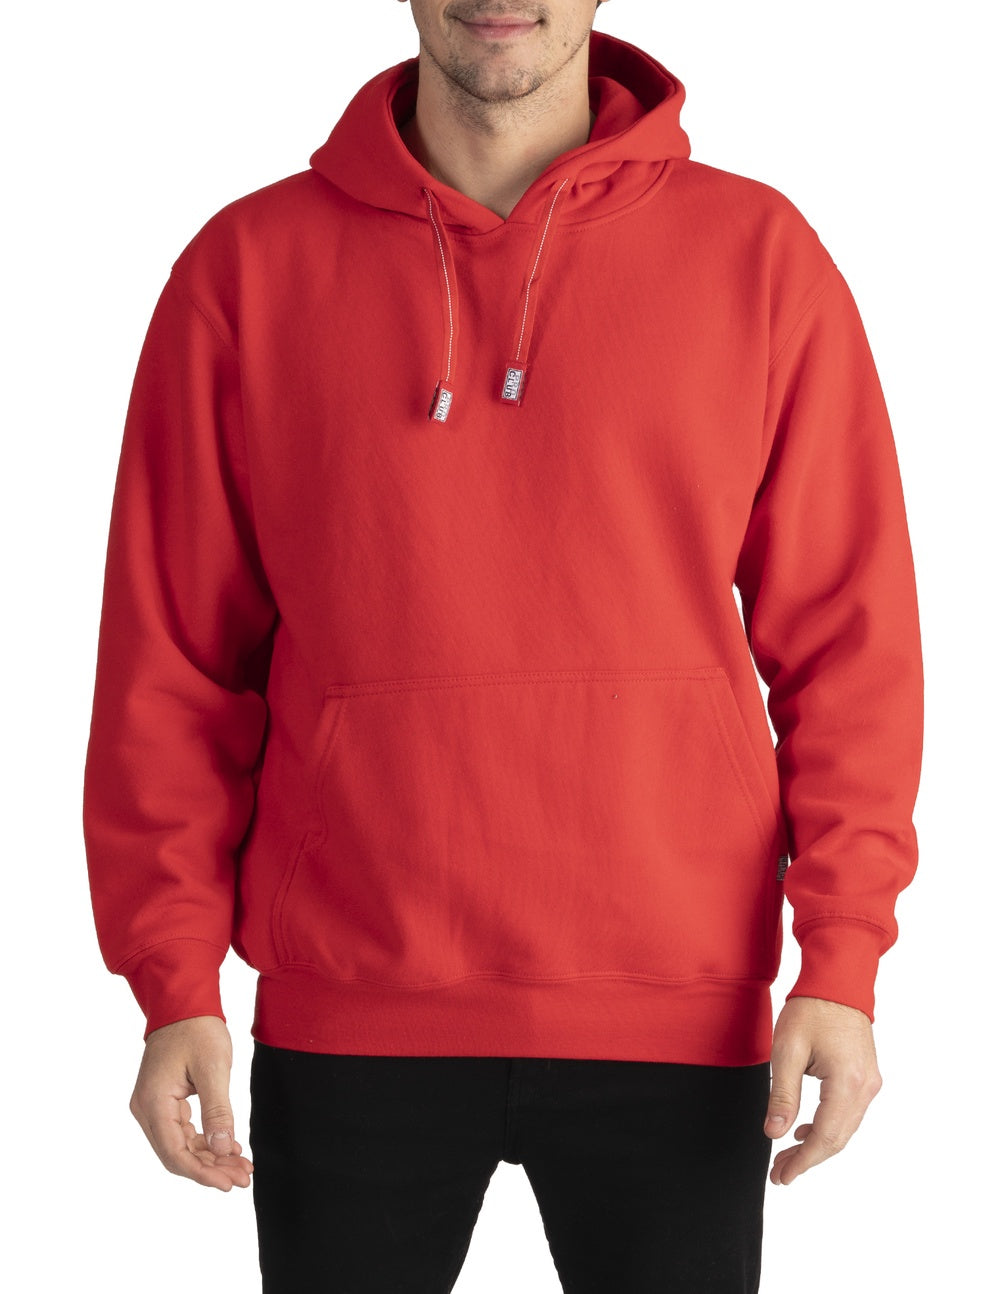 Pro Club Heavyweight Pullover Hoodie (13oz) - RED